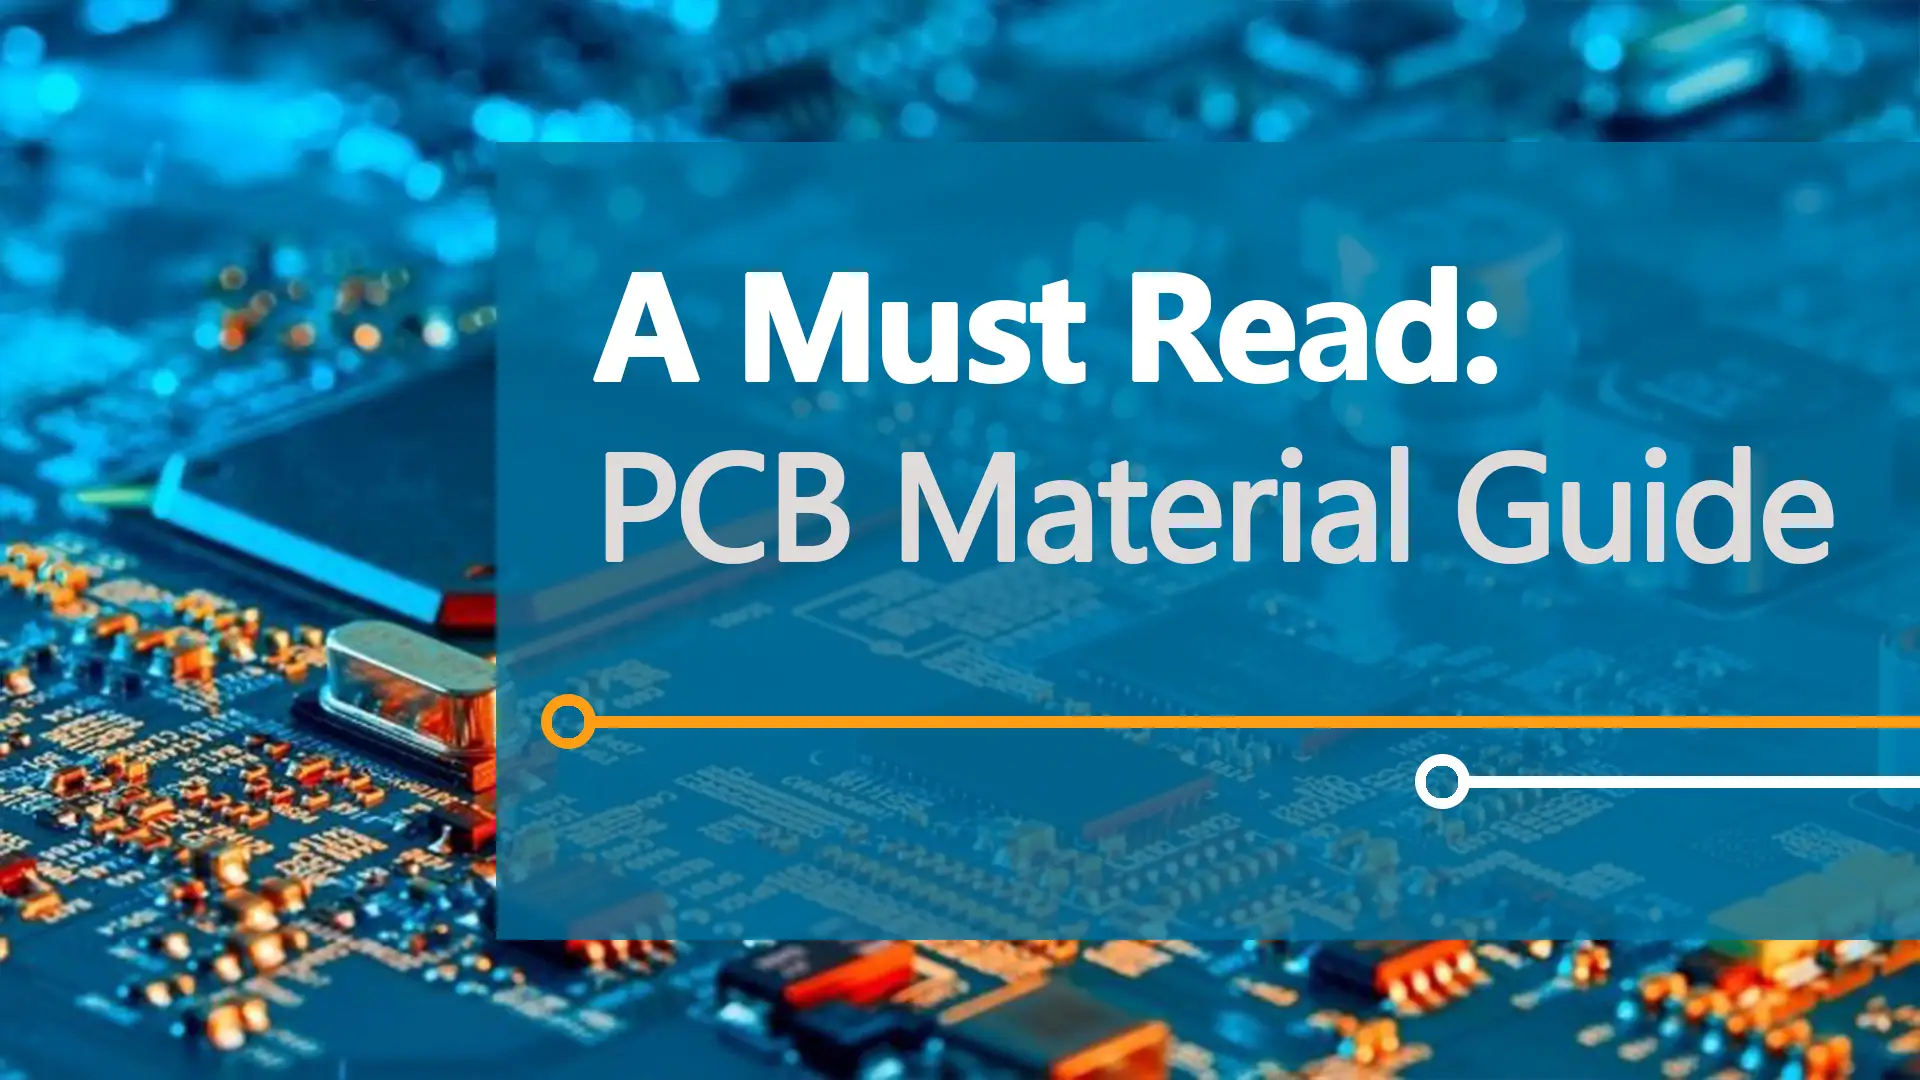 A Must Read: PCB Material Guide